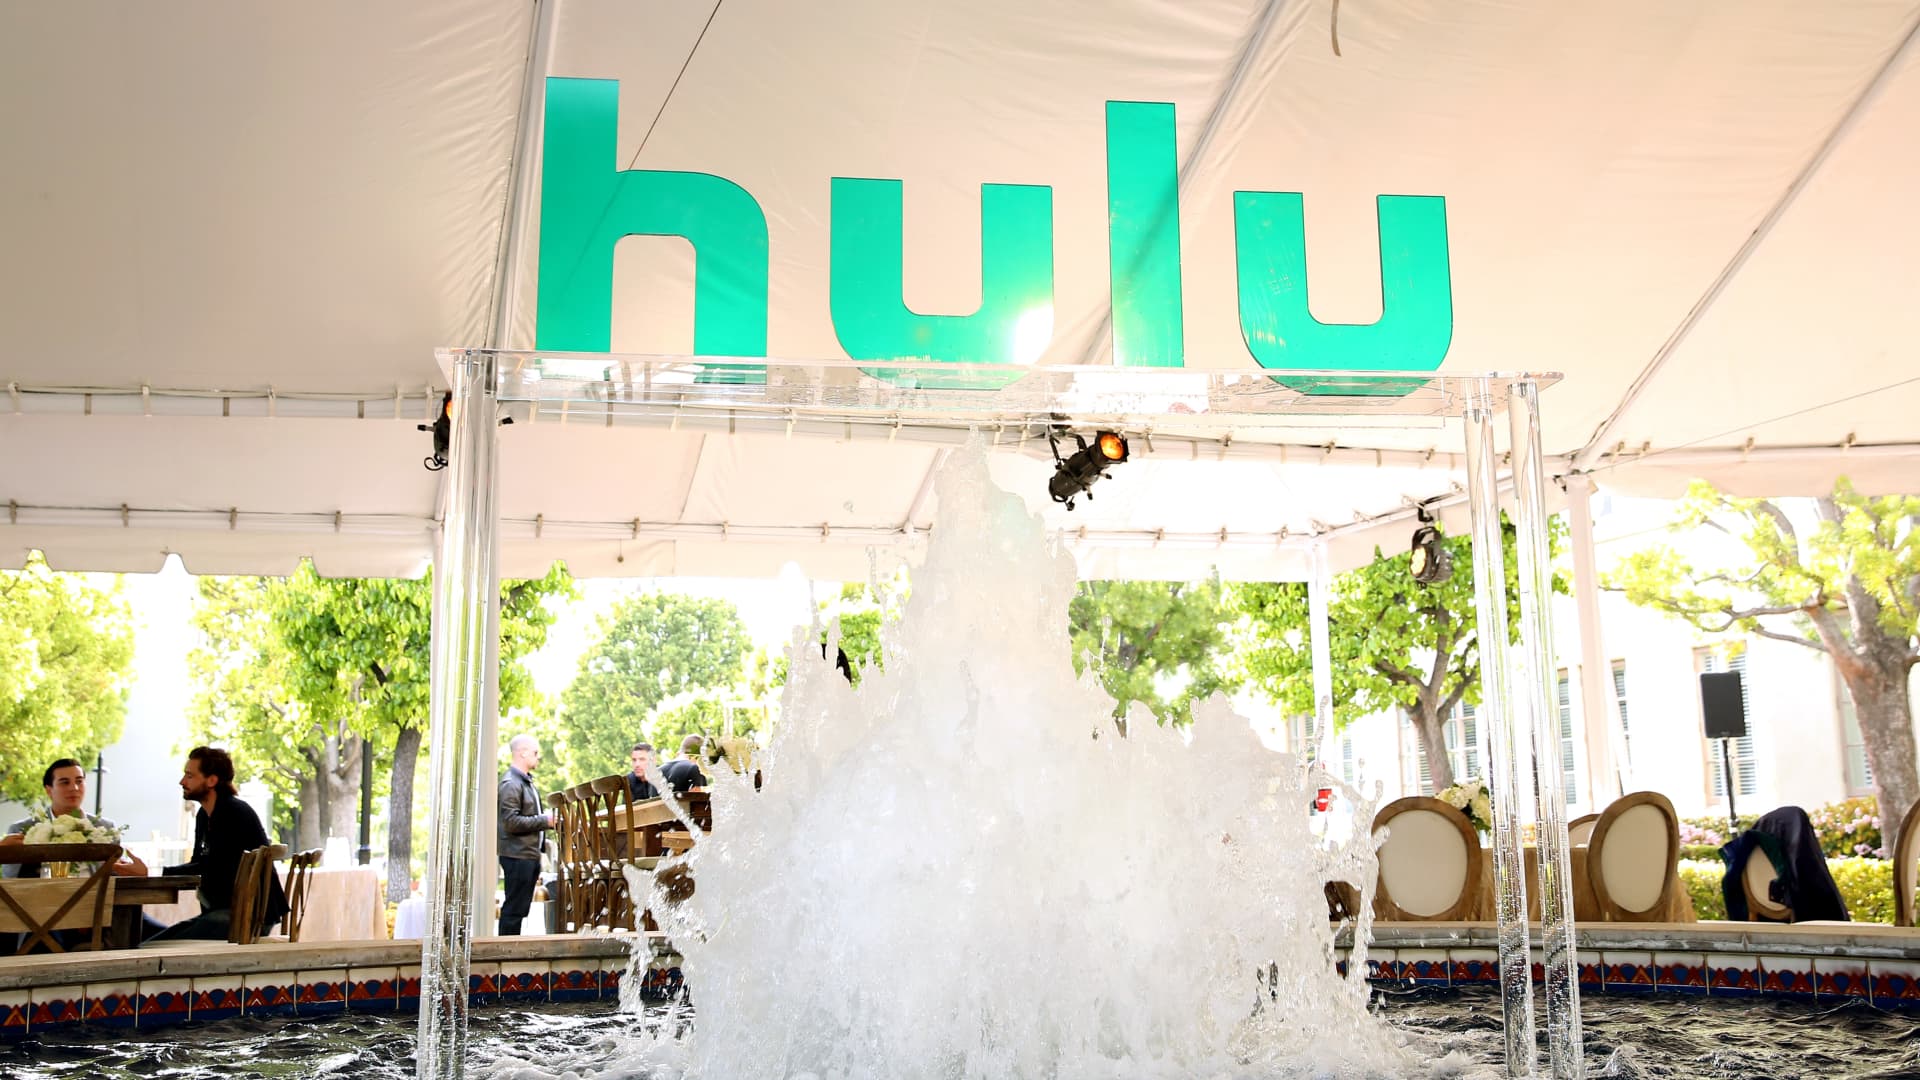 Comcast executives expect Disney to stick to its agreement to acquire the remaining stake in Hulu – CNBC